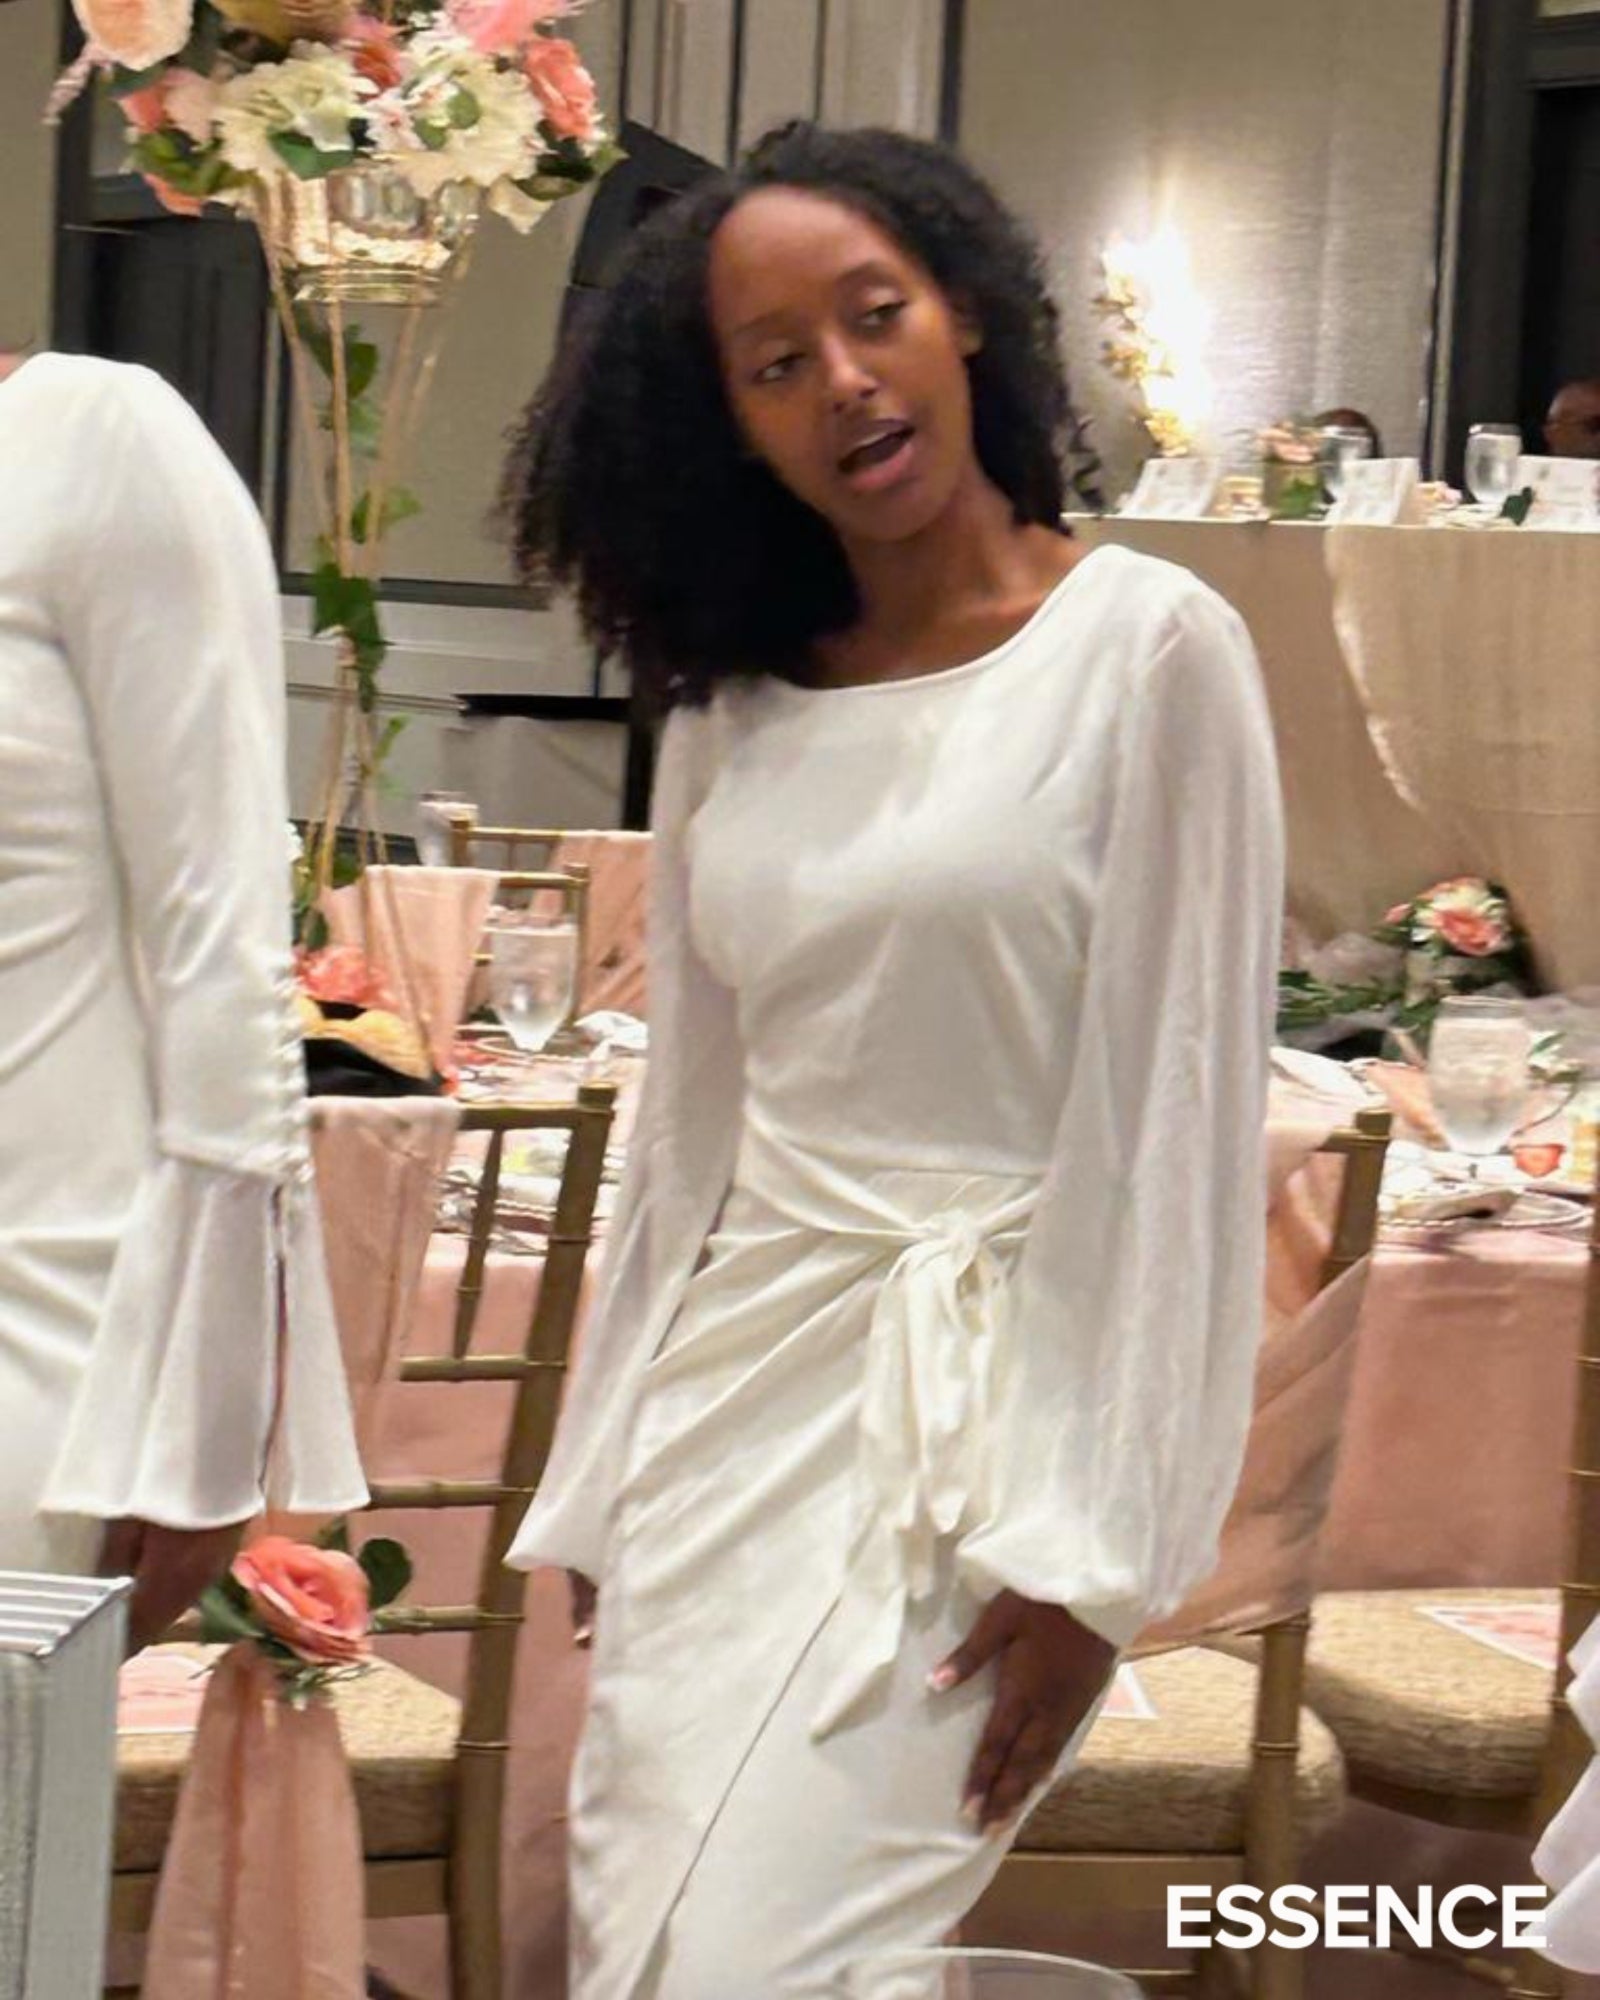 Exclusive: A ‘Very Proud’ Angelina Jolie Was There To Celebrate Zahara Becoming An AKA